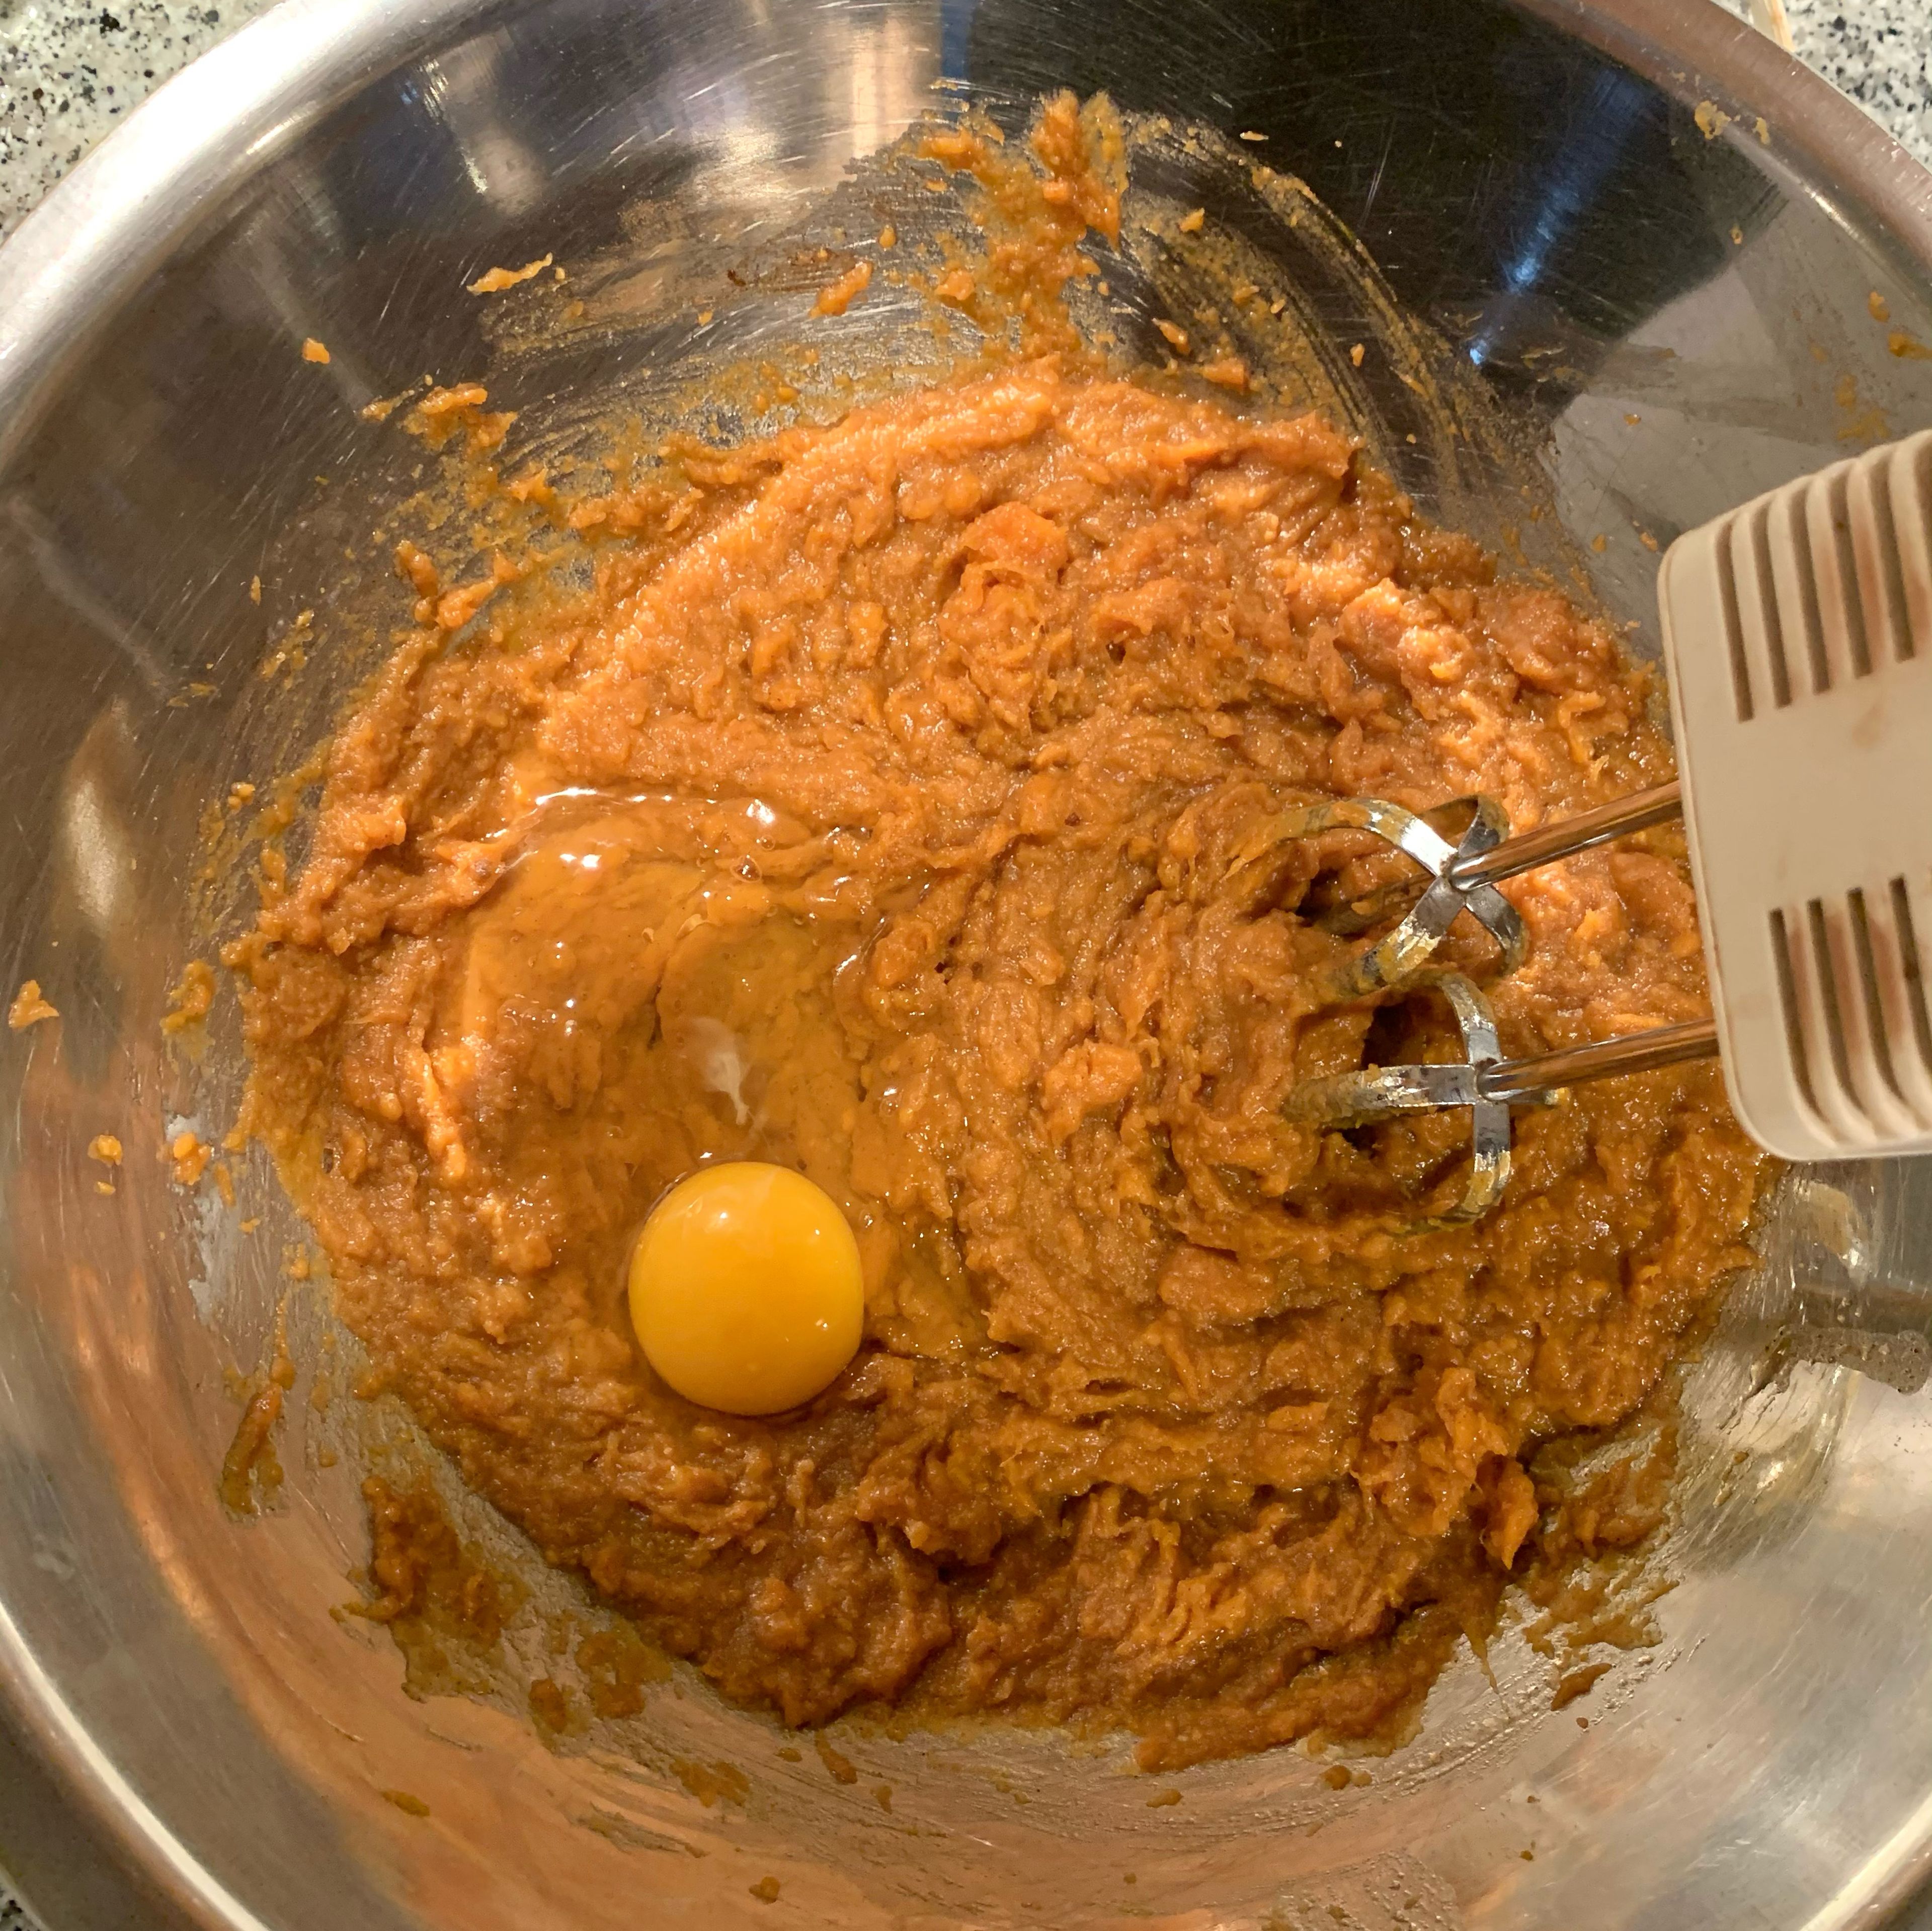 Mix with a hand mixer and add the eggs, one by one, and sweet condensed milk while mixing.